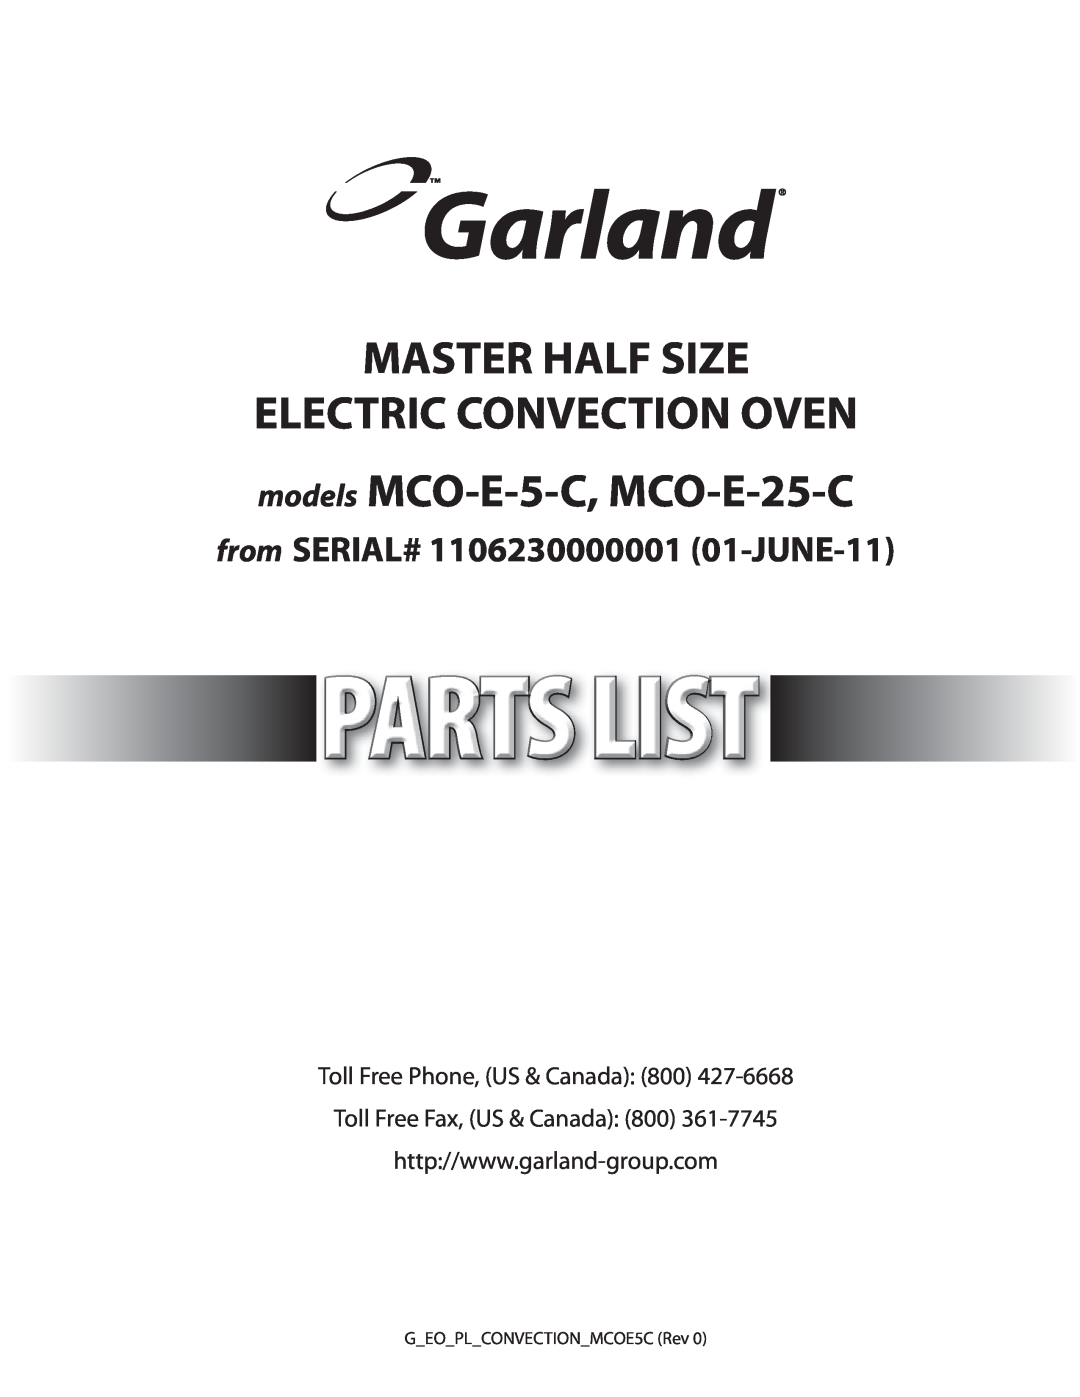 Garland manual Master Half Size Electric Convection Oven, models MCO-E-5-C, MCO-E-25-C, Toll Free Phone, US & Canada 